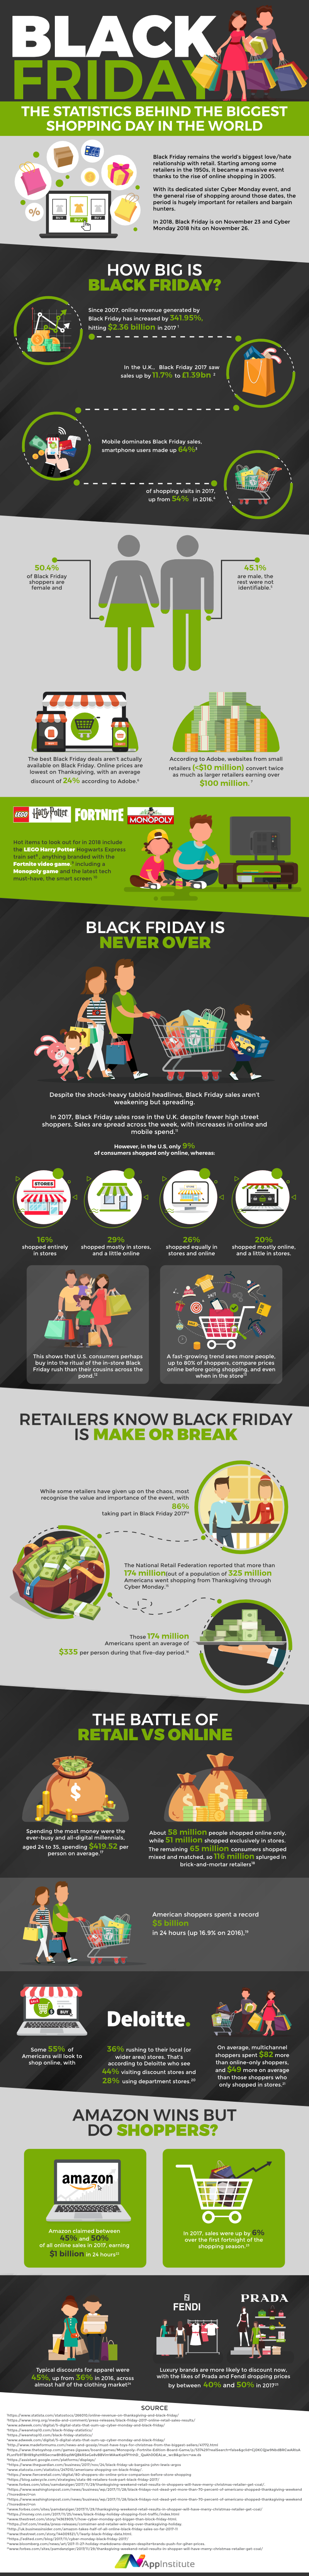 Black Friday: the Statistics Behind the Biggest Shopping Day in the World